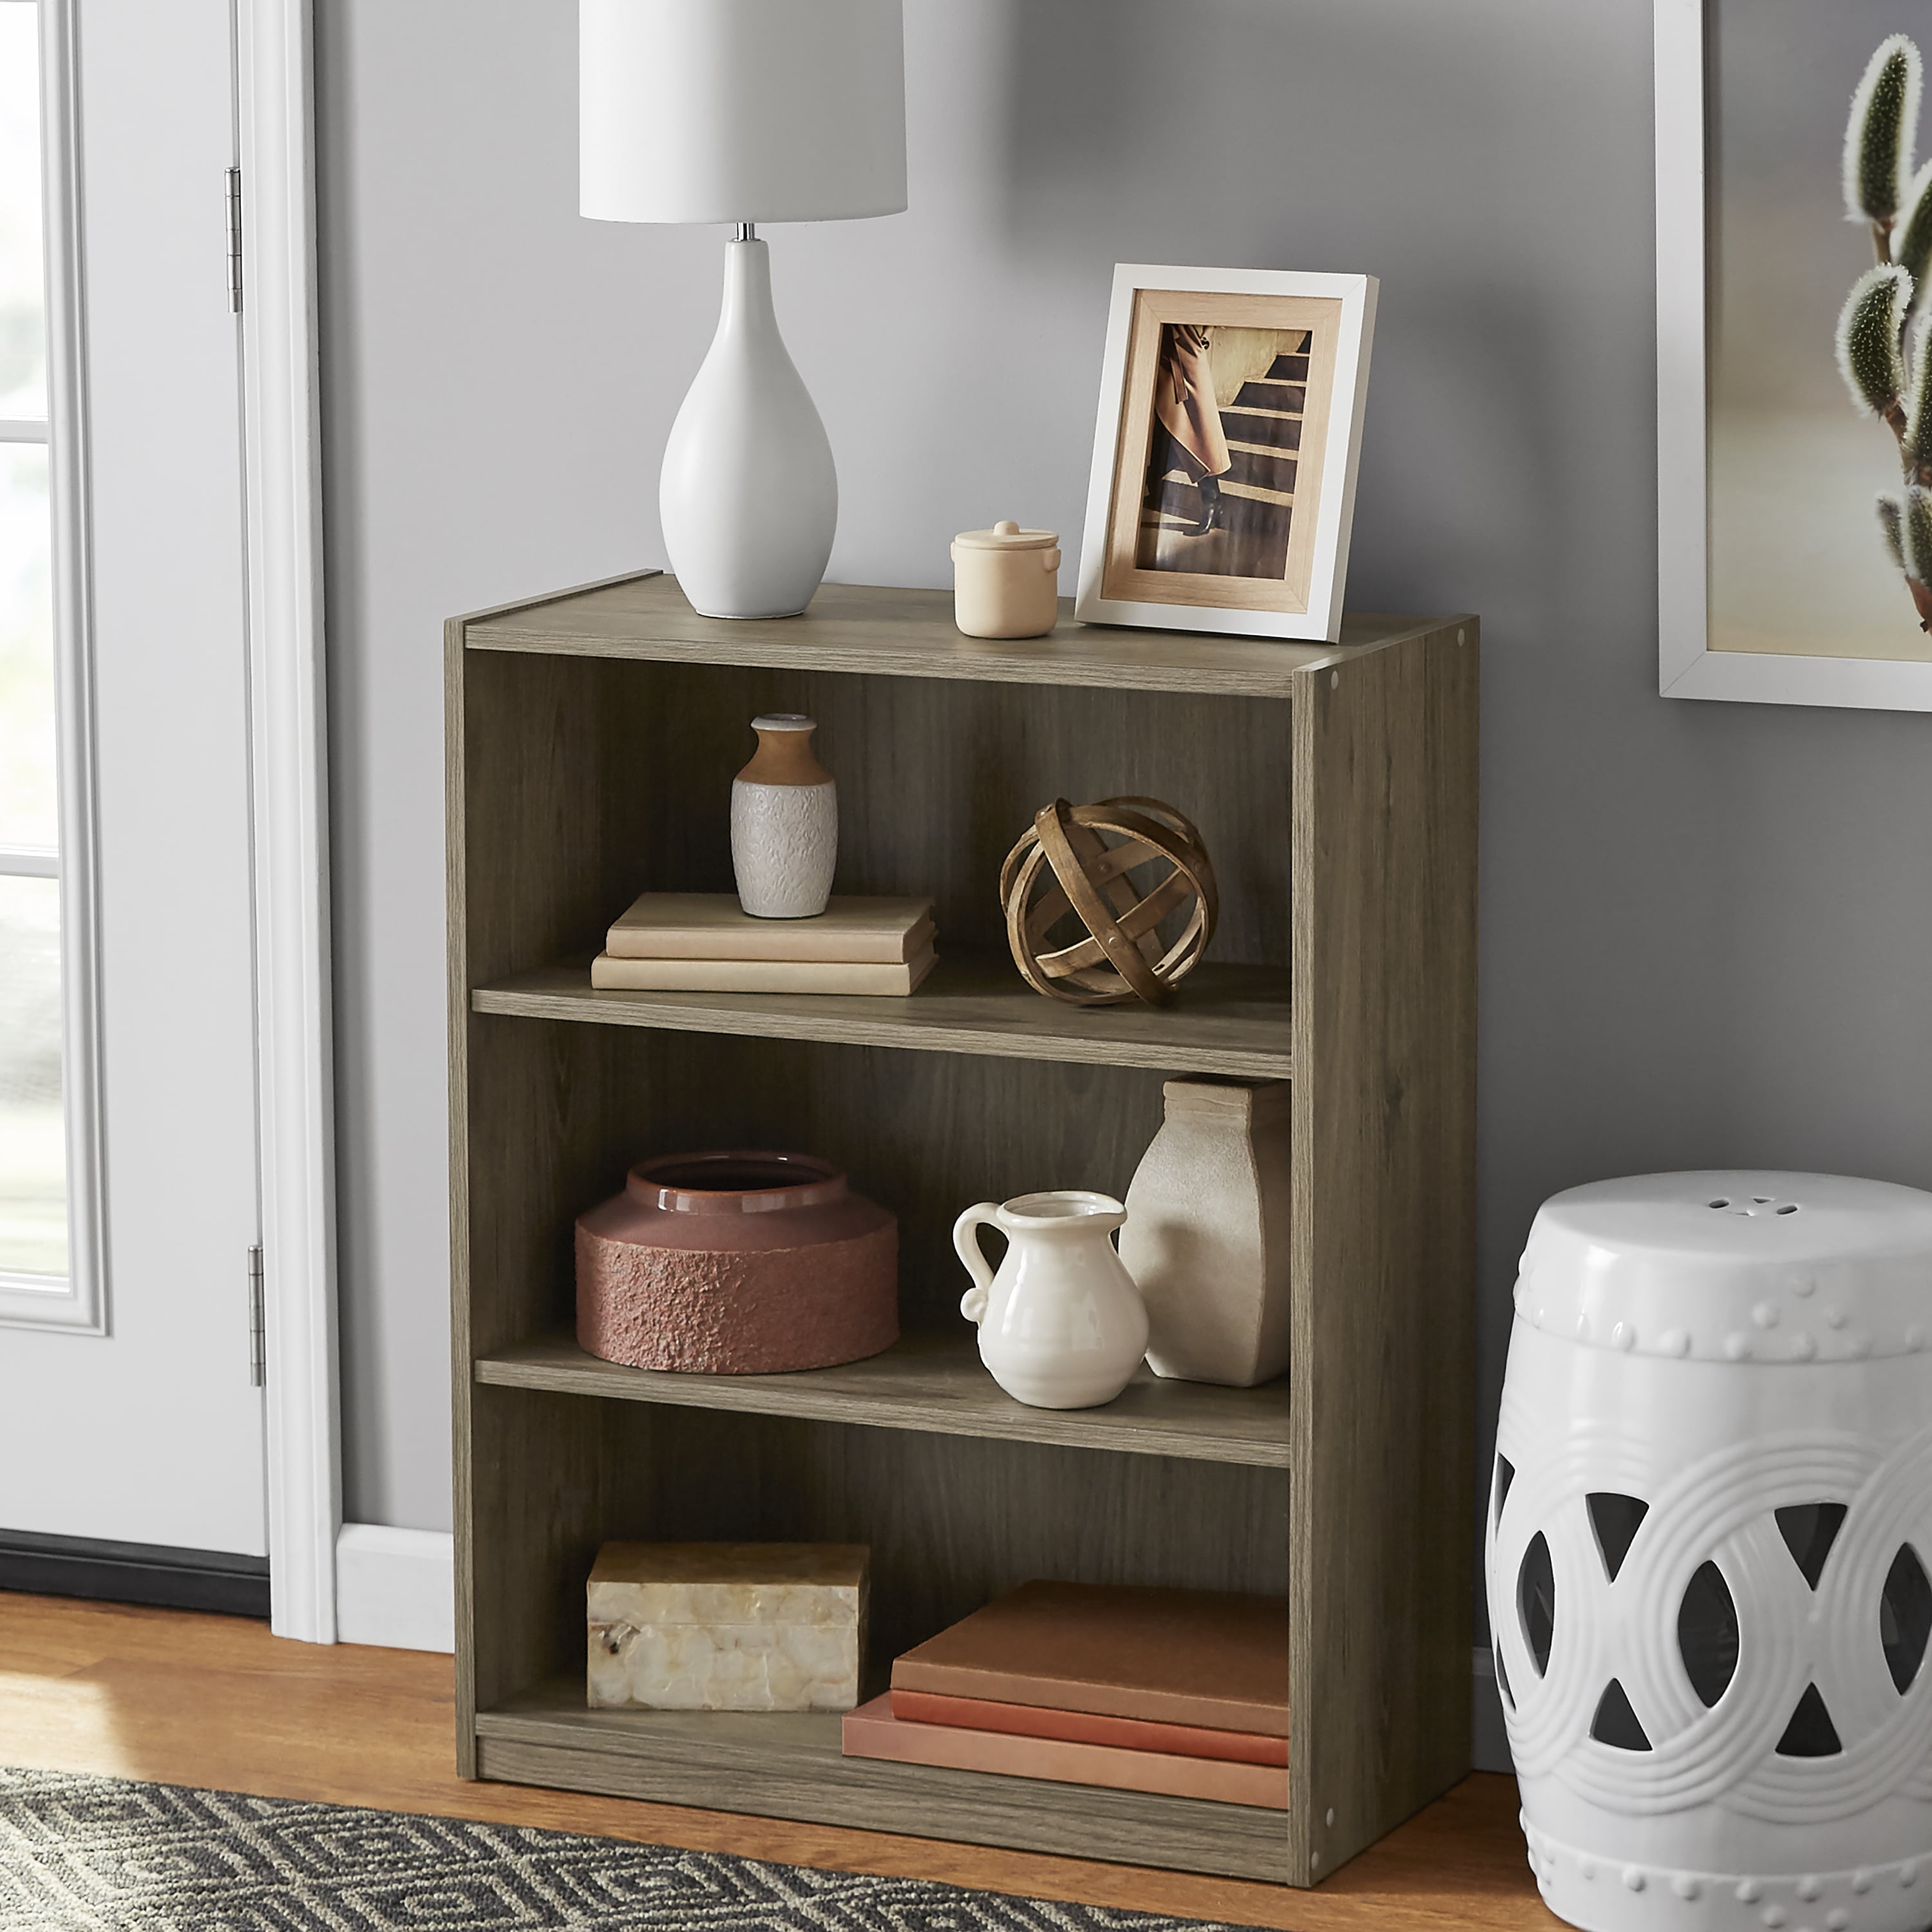 Mainstays 31 3 Shelf Bookcase With, Small Oak Bookcase With Adjustable Shelves